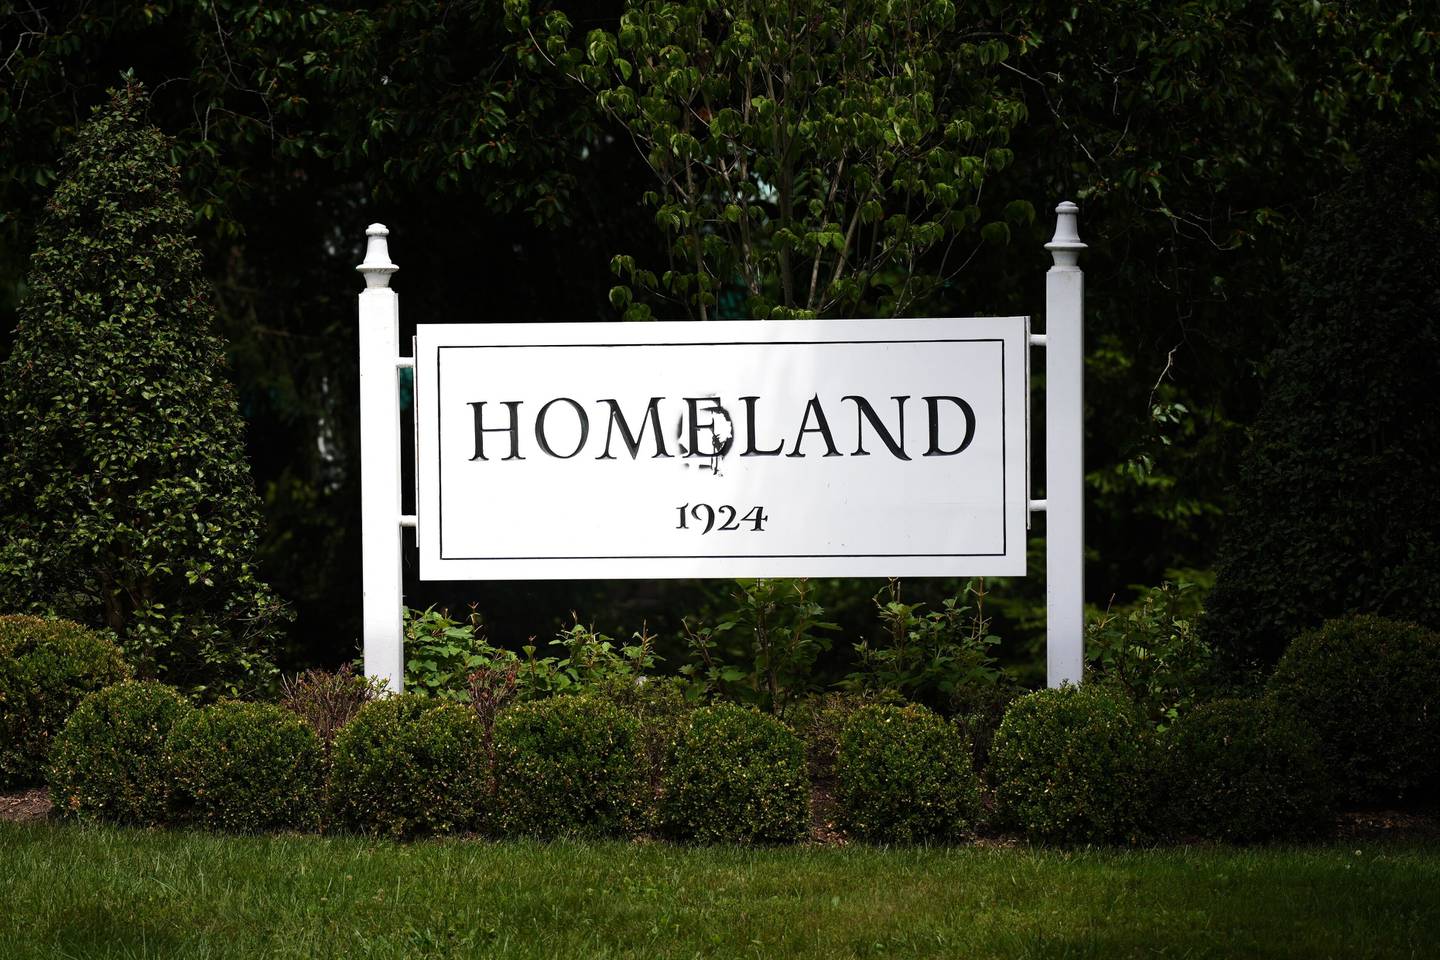 The Homeland sign near Loyola University, defaced with a slur at some point following the 2023 Baltimore Pride Parade on June 24, was temporarily patched up by the following afternoon.